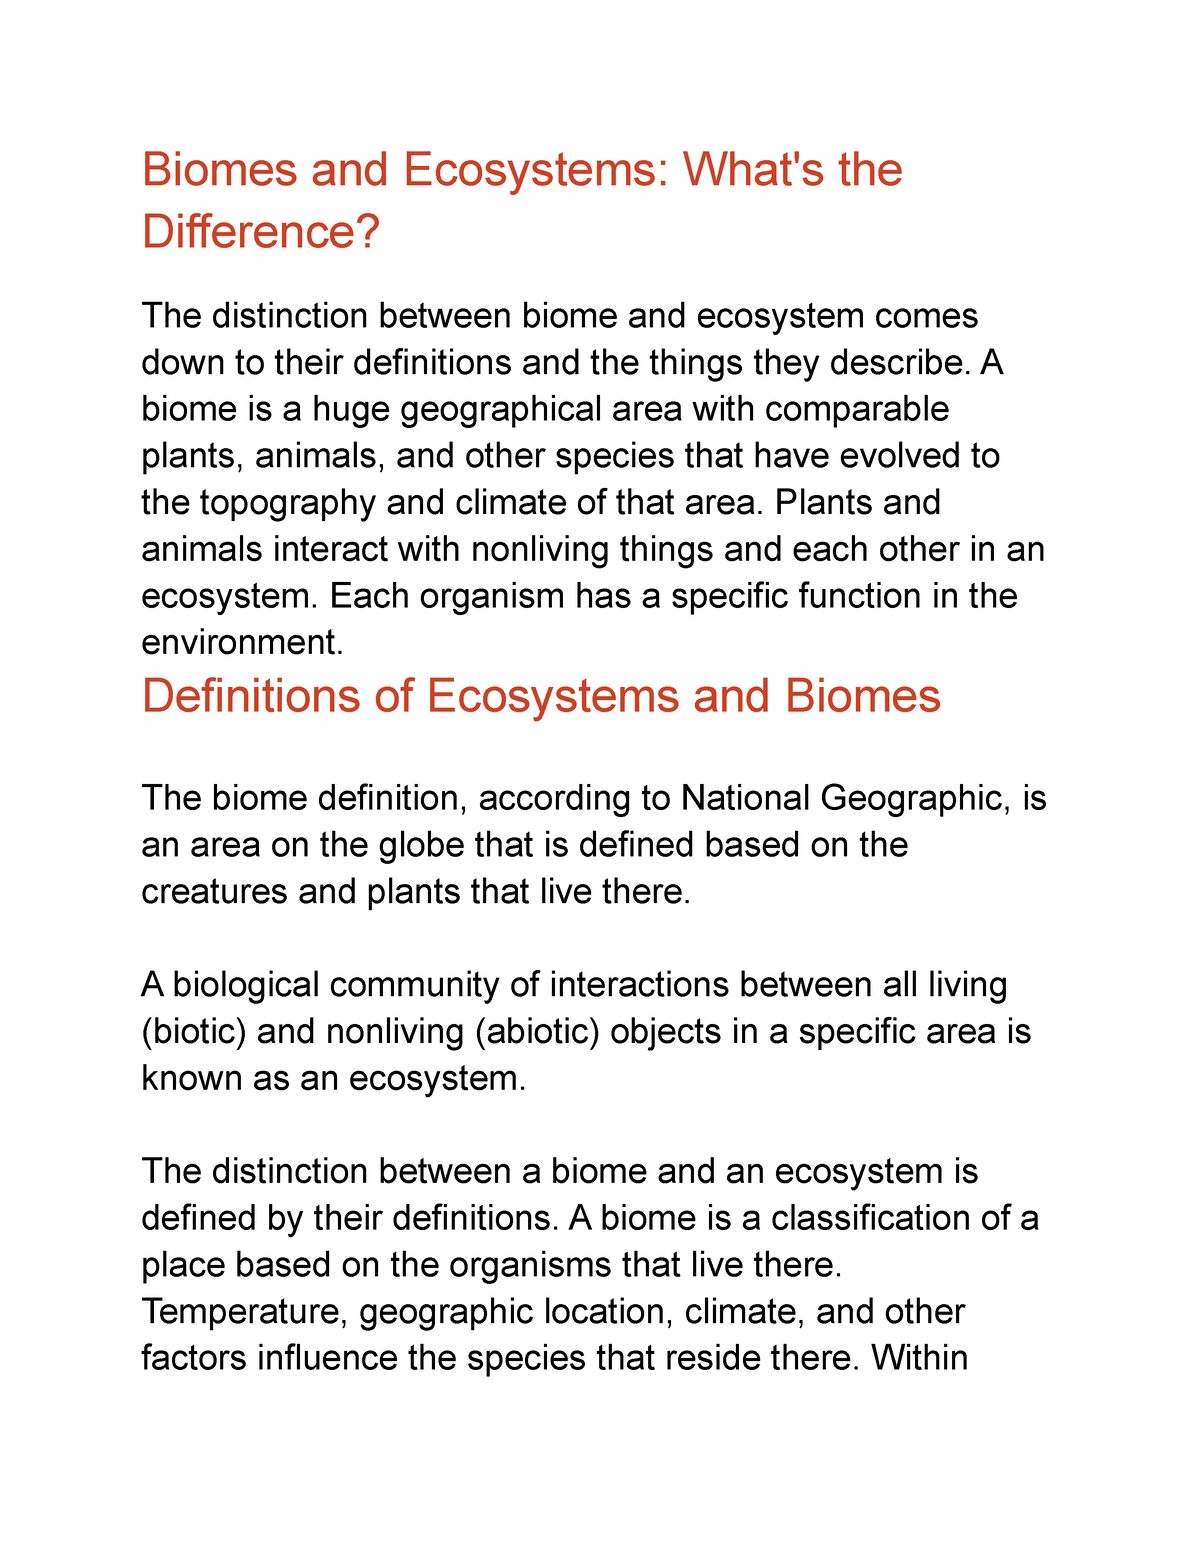 essay about ecosystem and biomes